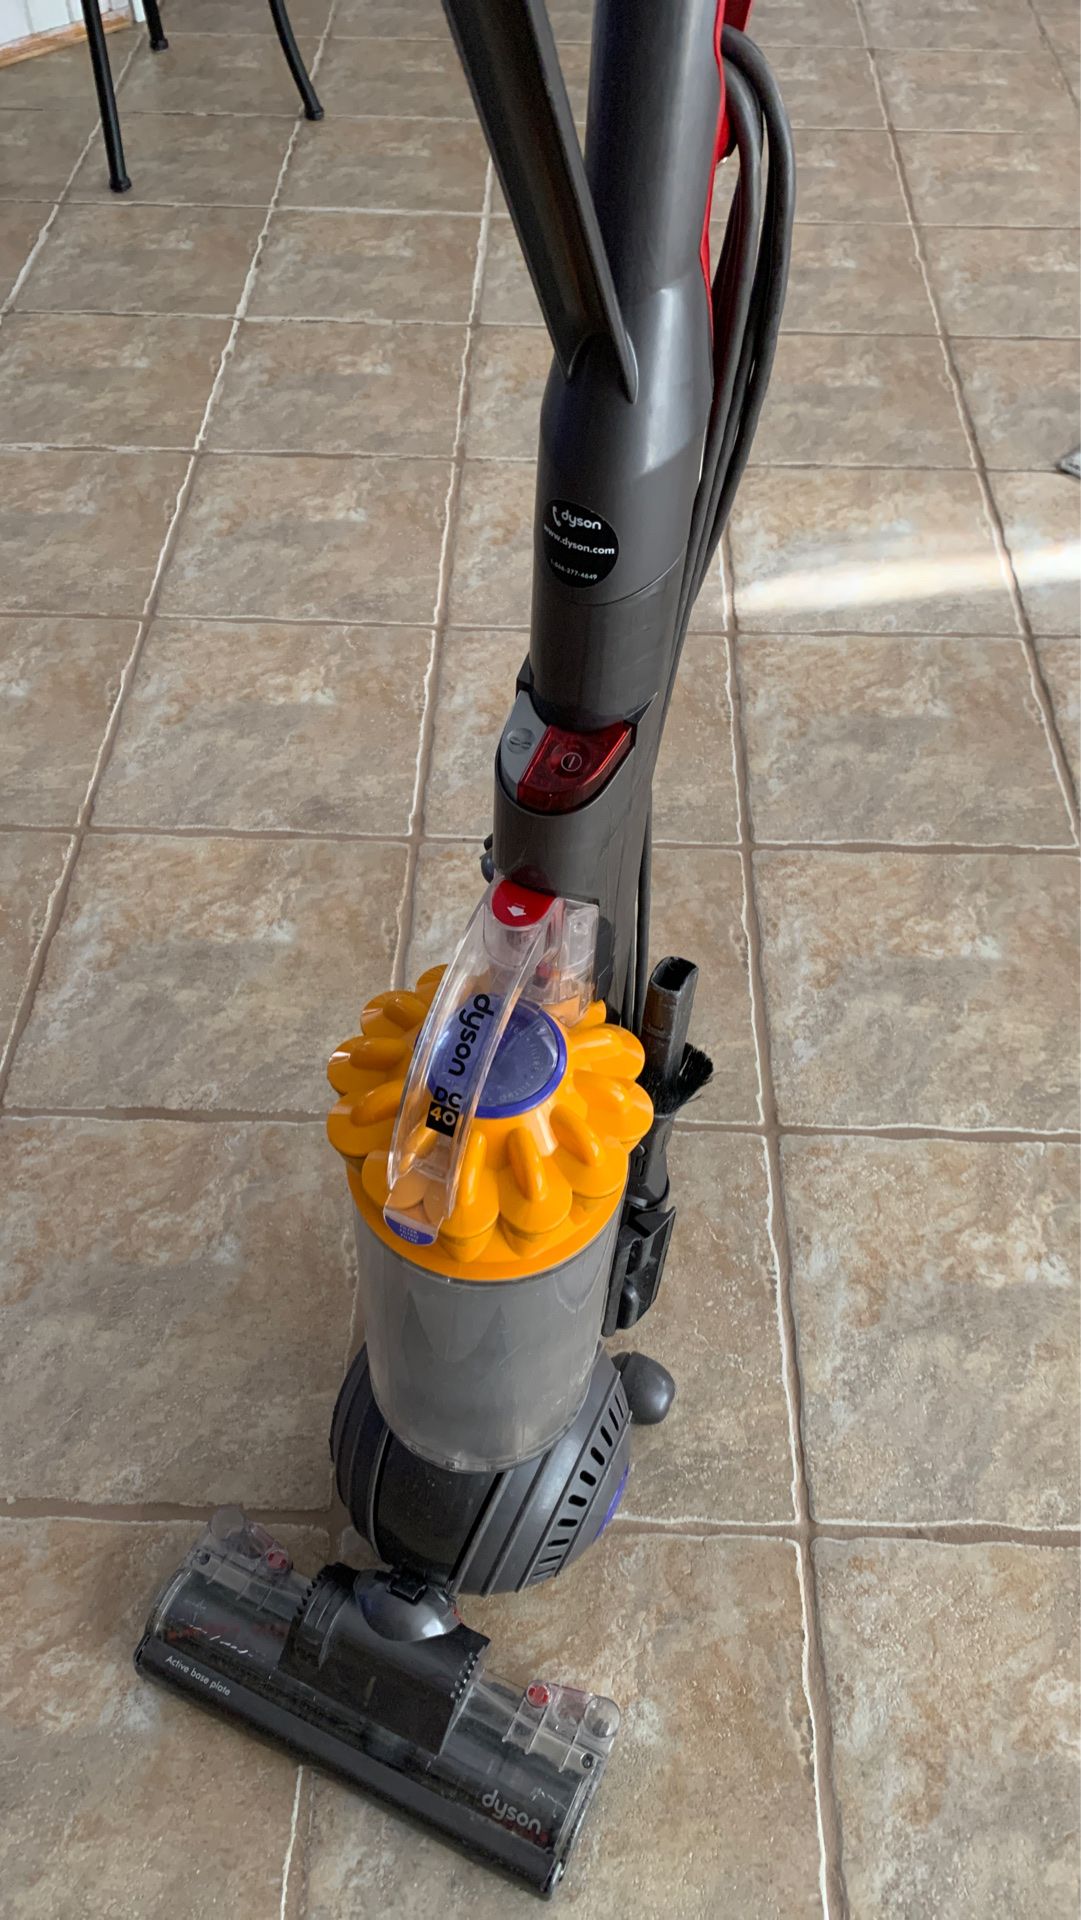 Dyson DC40 animal upright vacuum cleaner